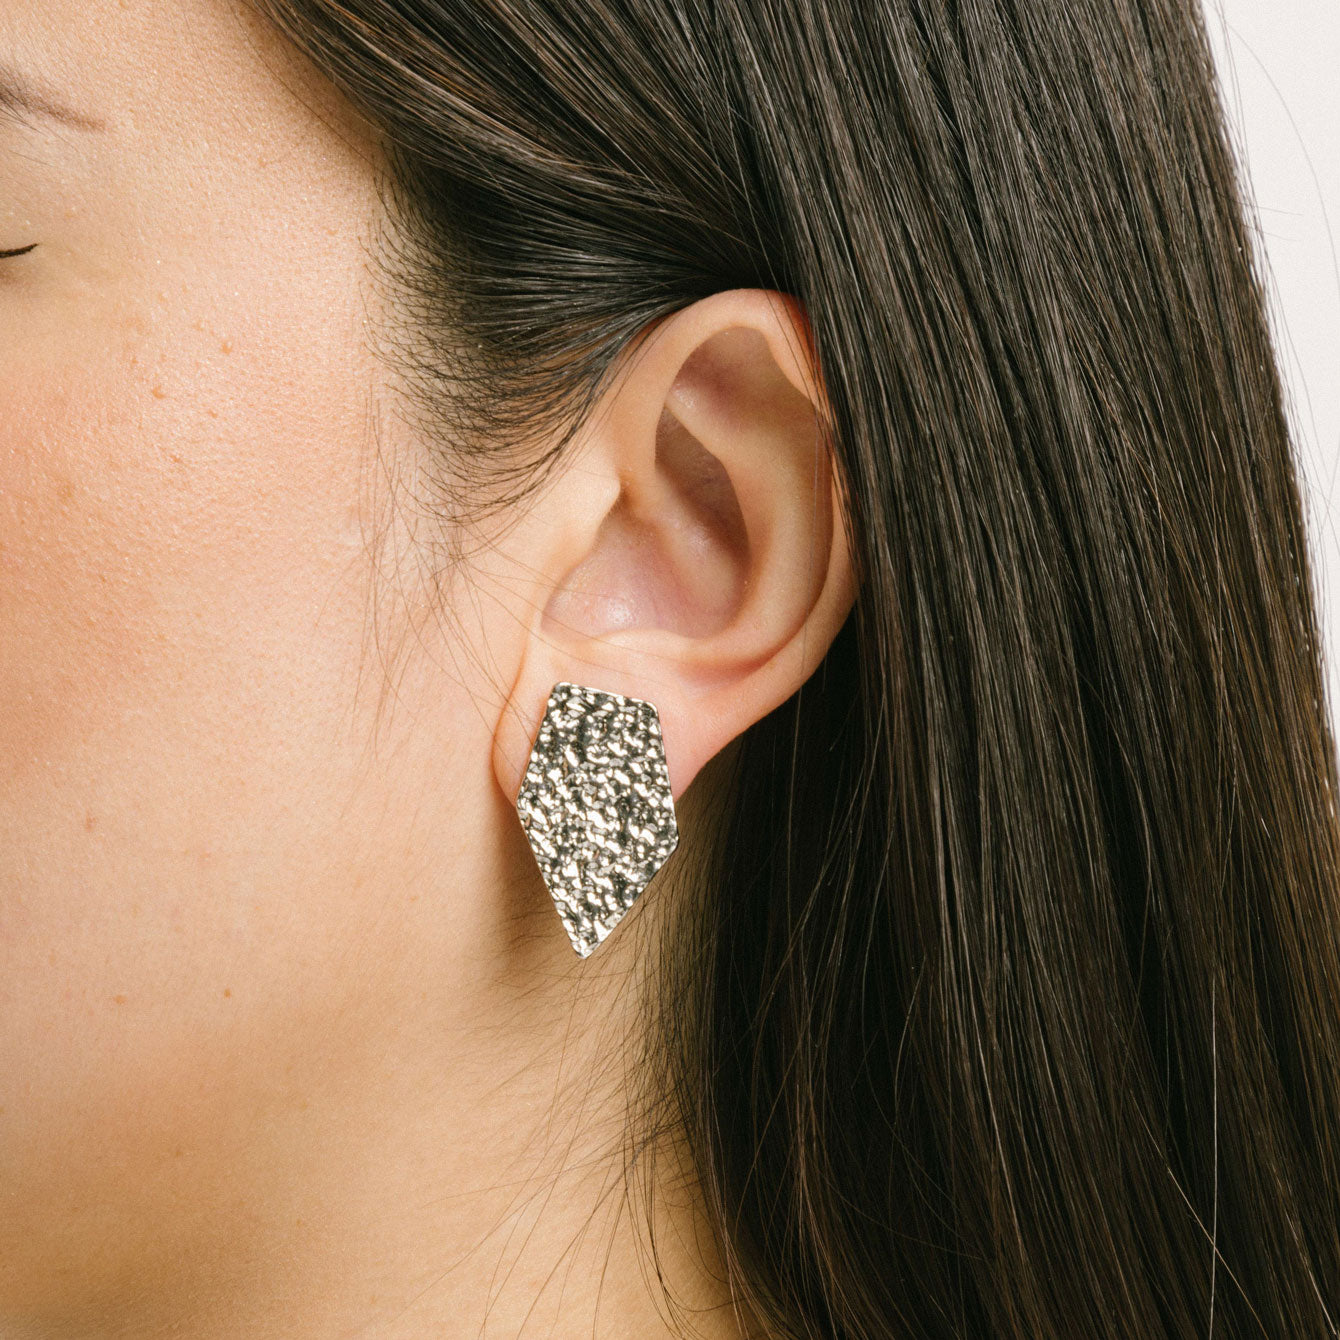 A model wearing the Vesper Clip On Earrings in Silver are padded clip-on earrings with a secure hold. Perfect for all ear types, they offer a comfortable wear for 8-12 hours. Made of zinc and copper alloy, the earrings come with a removable black rubber padding and can be worn as pictured. Please note, item is sold as one pair.